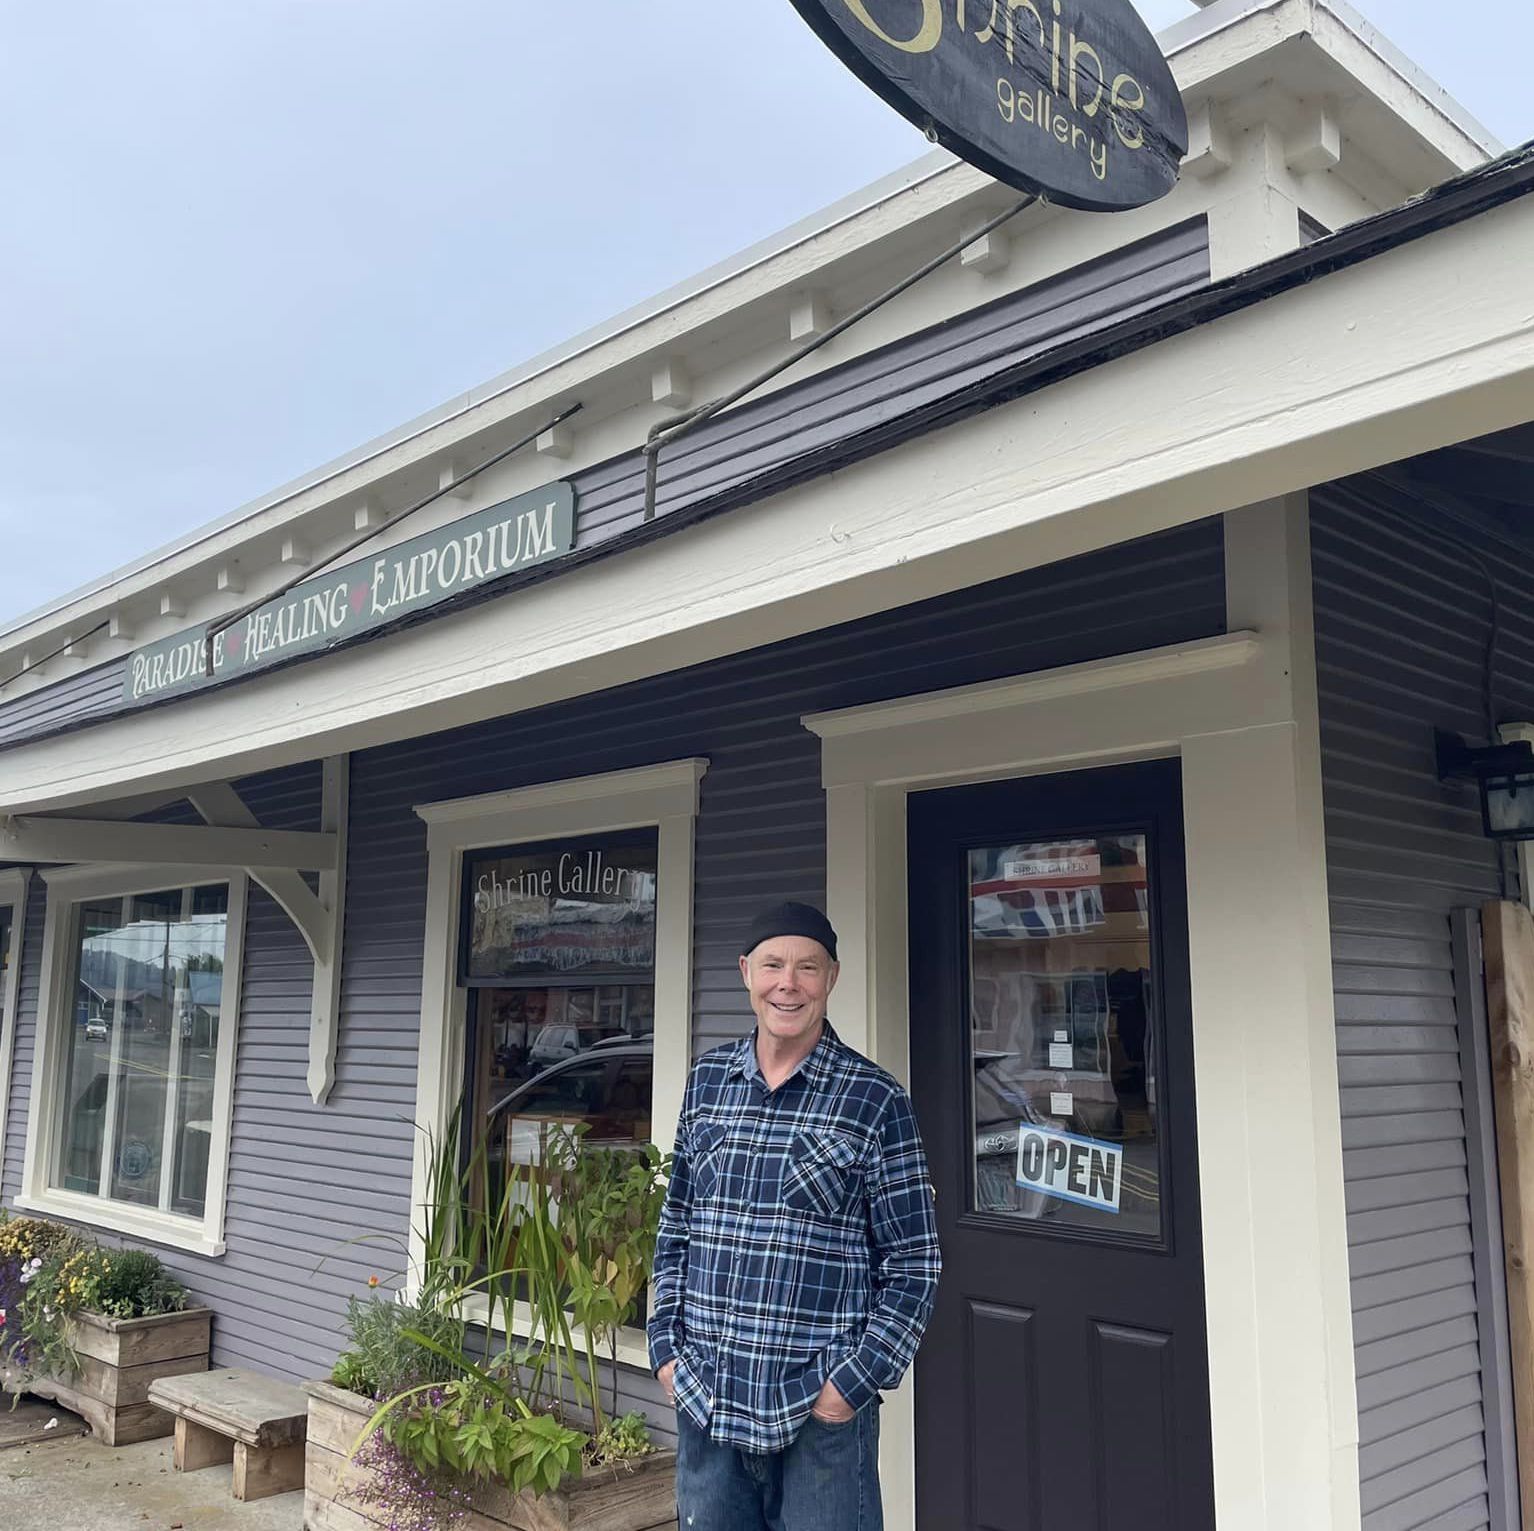 Jay, Owner and Artist at Shrine Gallery, Cloverdale Oregon